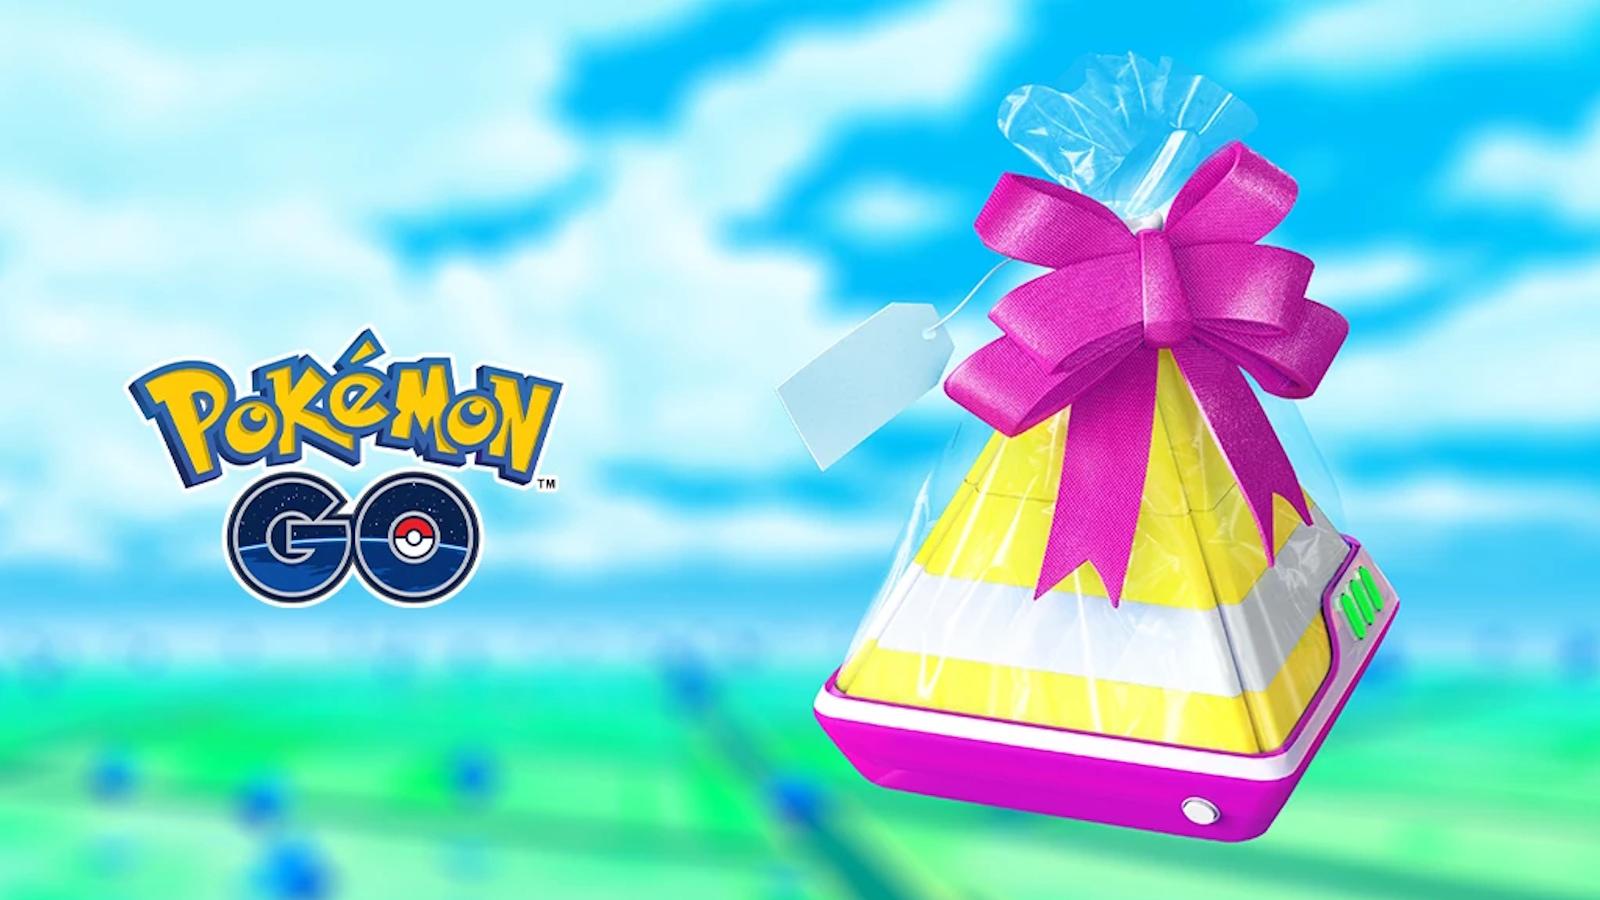 Pokemon GO gift and logo with overworld map in background.